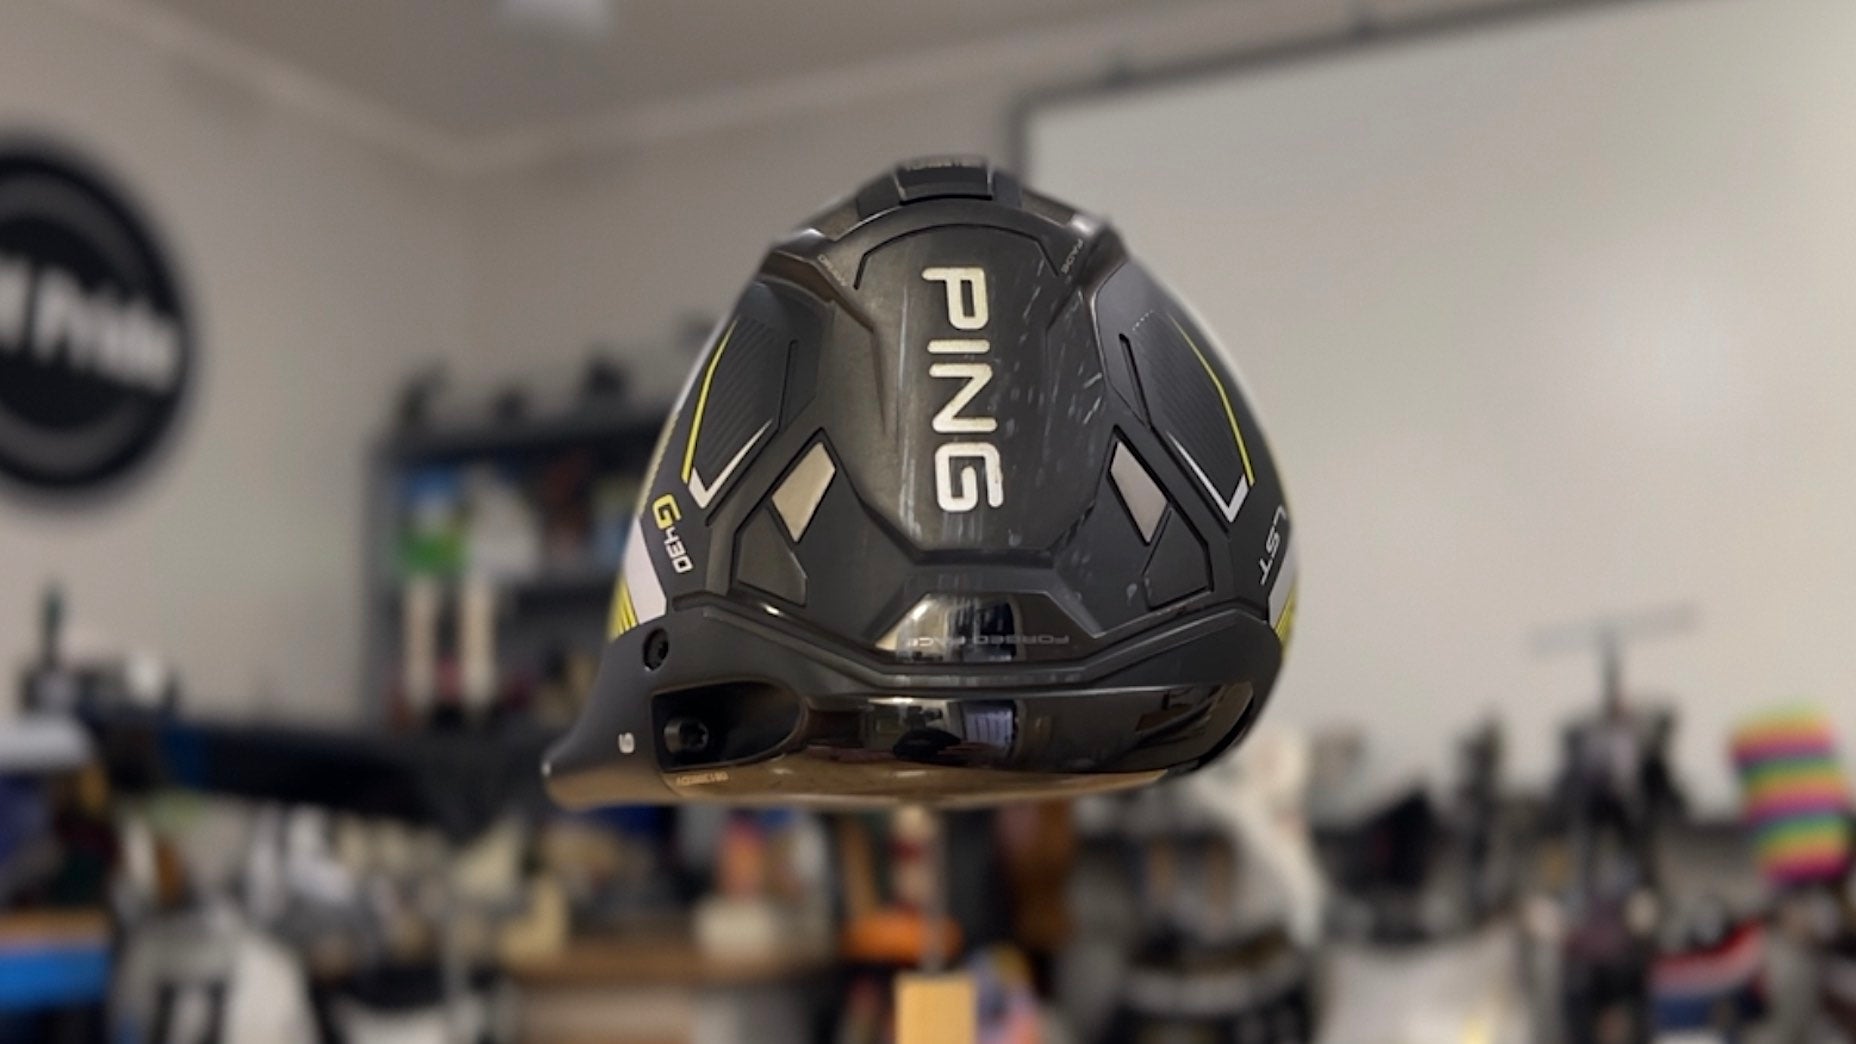 Ping driver balanced to find sweet spot